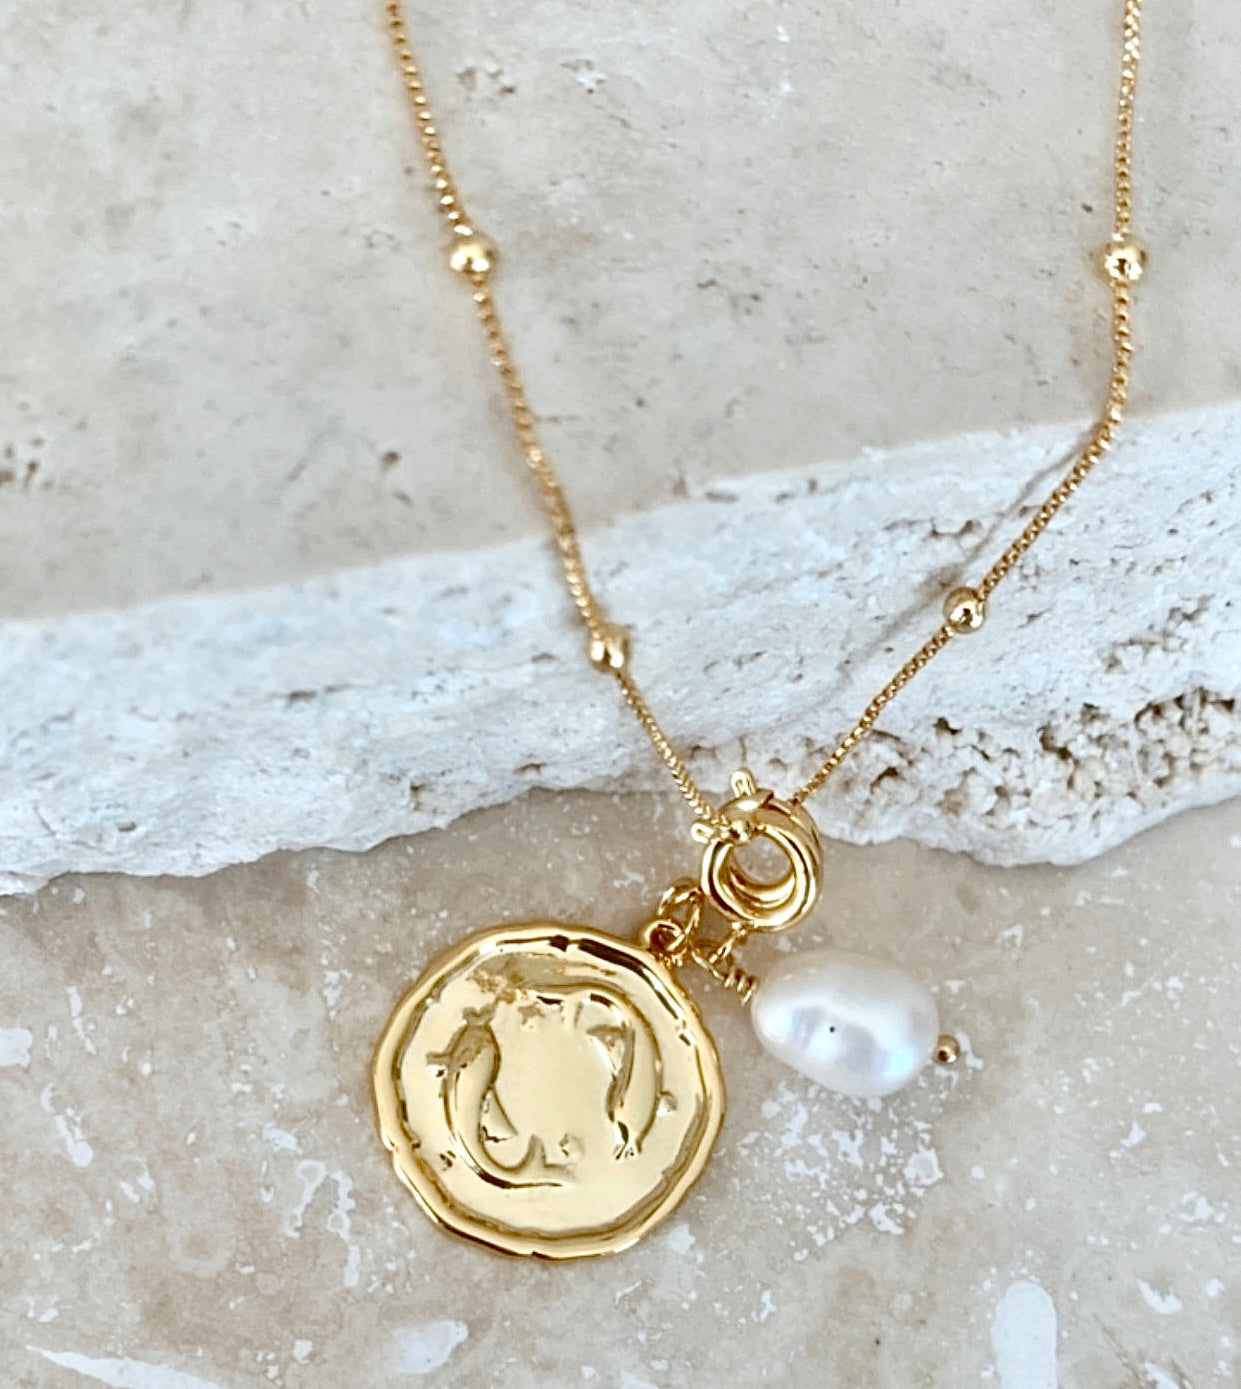 Zodiac with Freshwater Pearl - Pisces Feb 20 - March 20